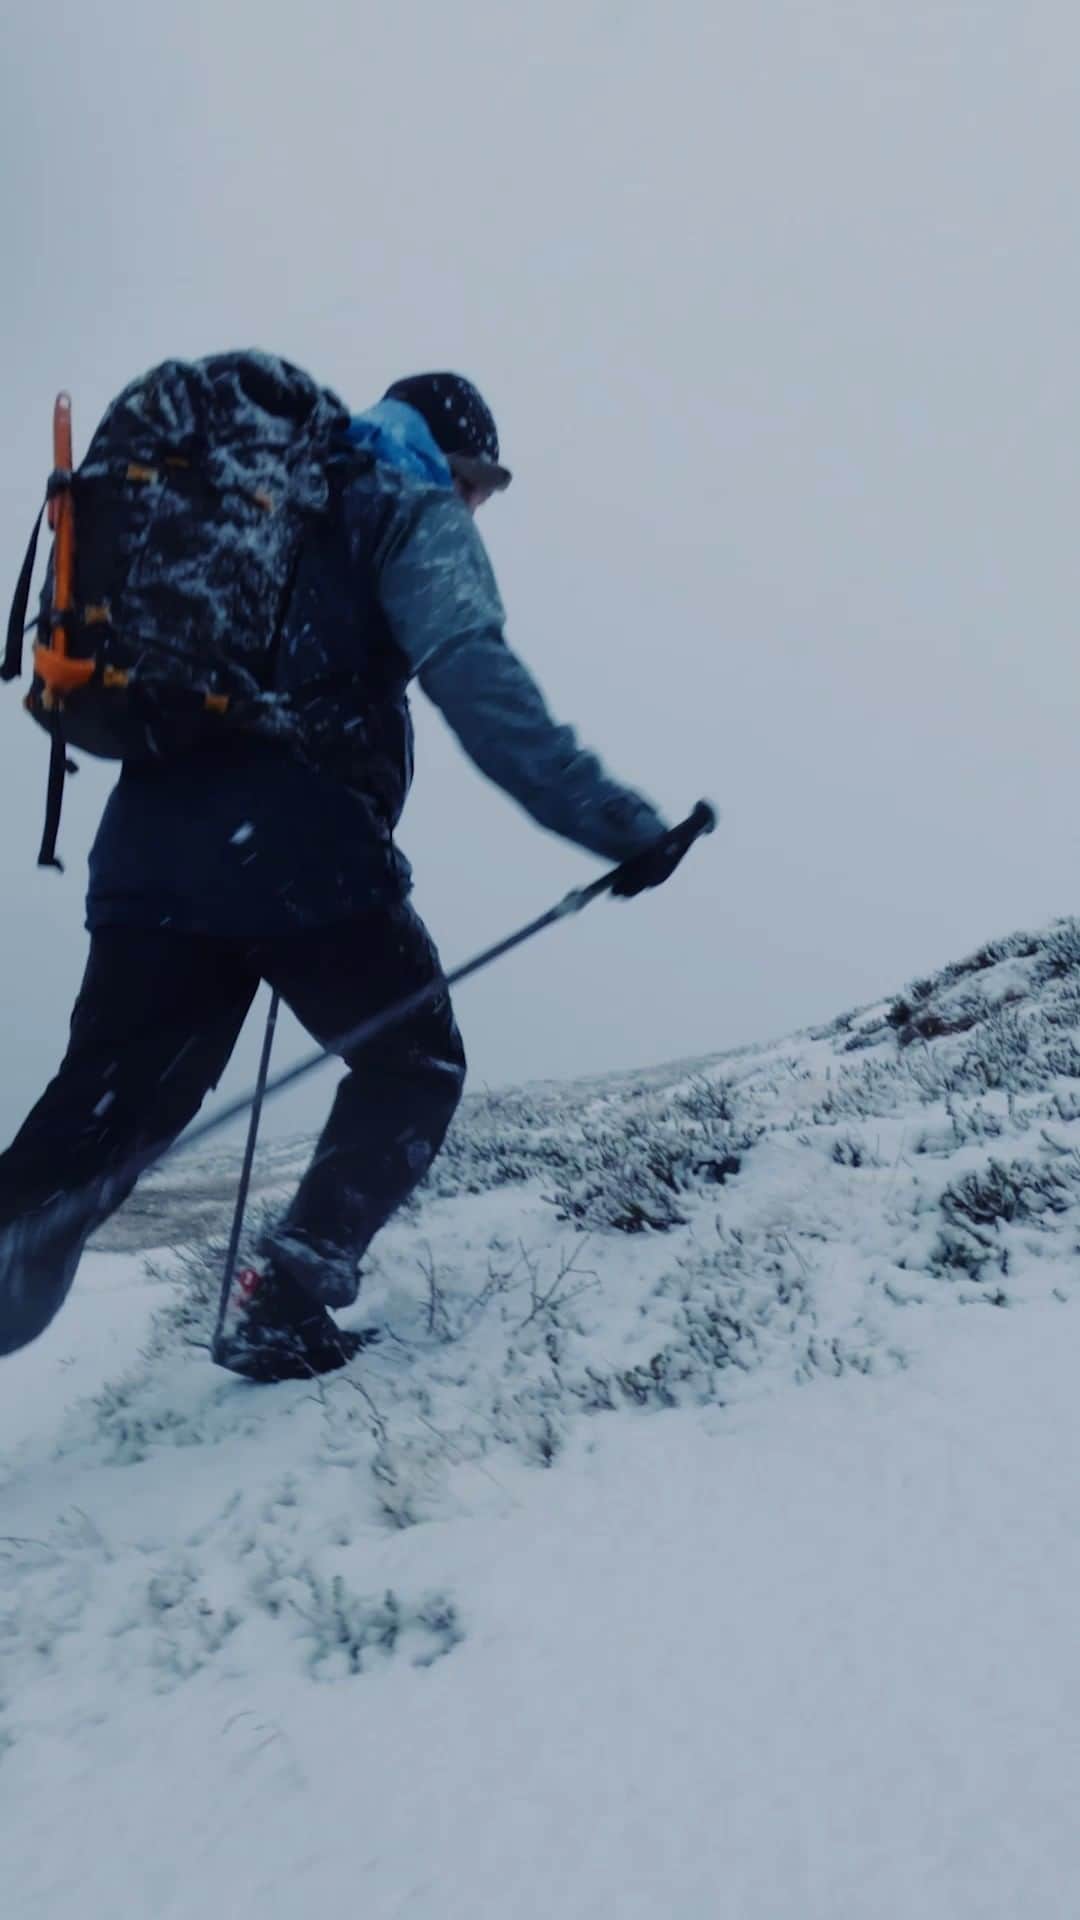 Suuntoのインスタグラム：「Stoked for the new season?⁣ ⁣ @anttiautti certainly is, and shares his excitement in the first episode of the new Arctic Lines season.⁣ ⁣ Follow along as Antti and his crew hike and ride iconic backcountry lines north of the Arctic Circle in Finland, Sweden and Norway. Link in bio for the full episode!⁣ ⁣ 🎞 @mpkarlin⁣ 🎥 @jaakkoposti⁣ ⁣ #ArcticLines⁣ #Suunto #SuuntoVertical⁣ #AdventureStartsHere」